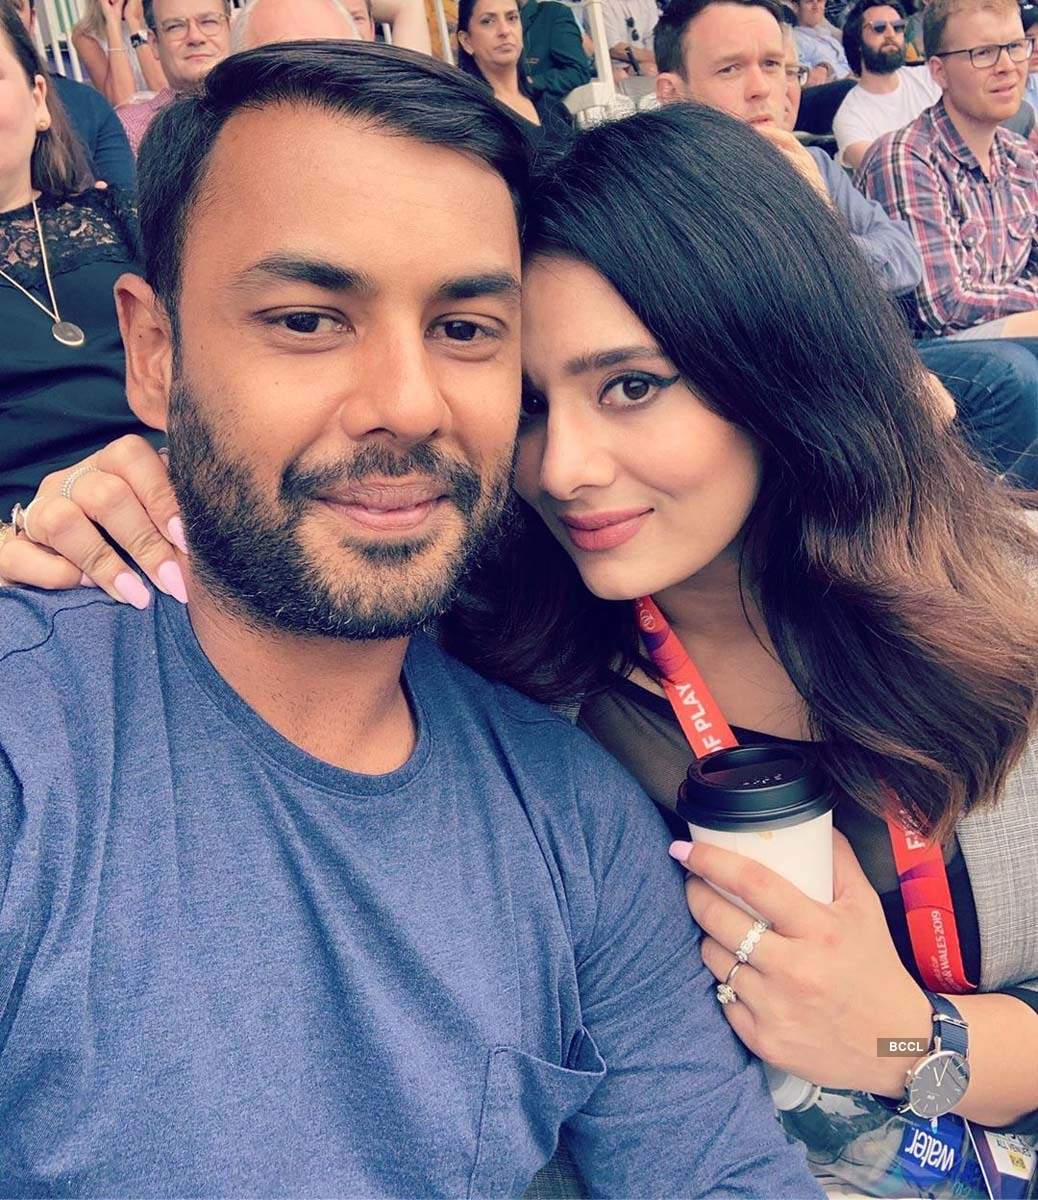 Love-filled pictures of sports presenter Mayanti Langer and Indian cricketer Stuart Binny